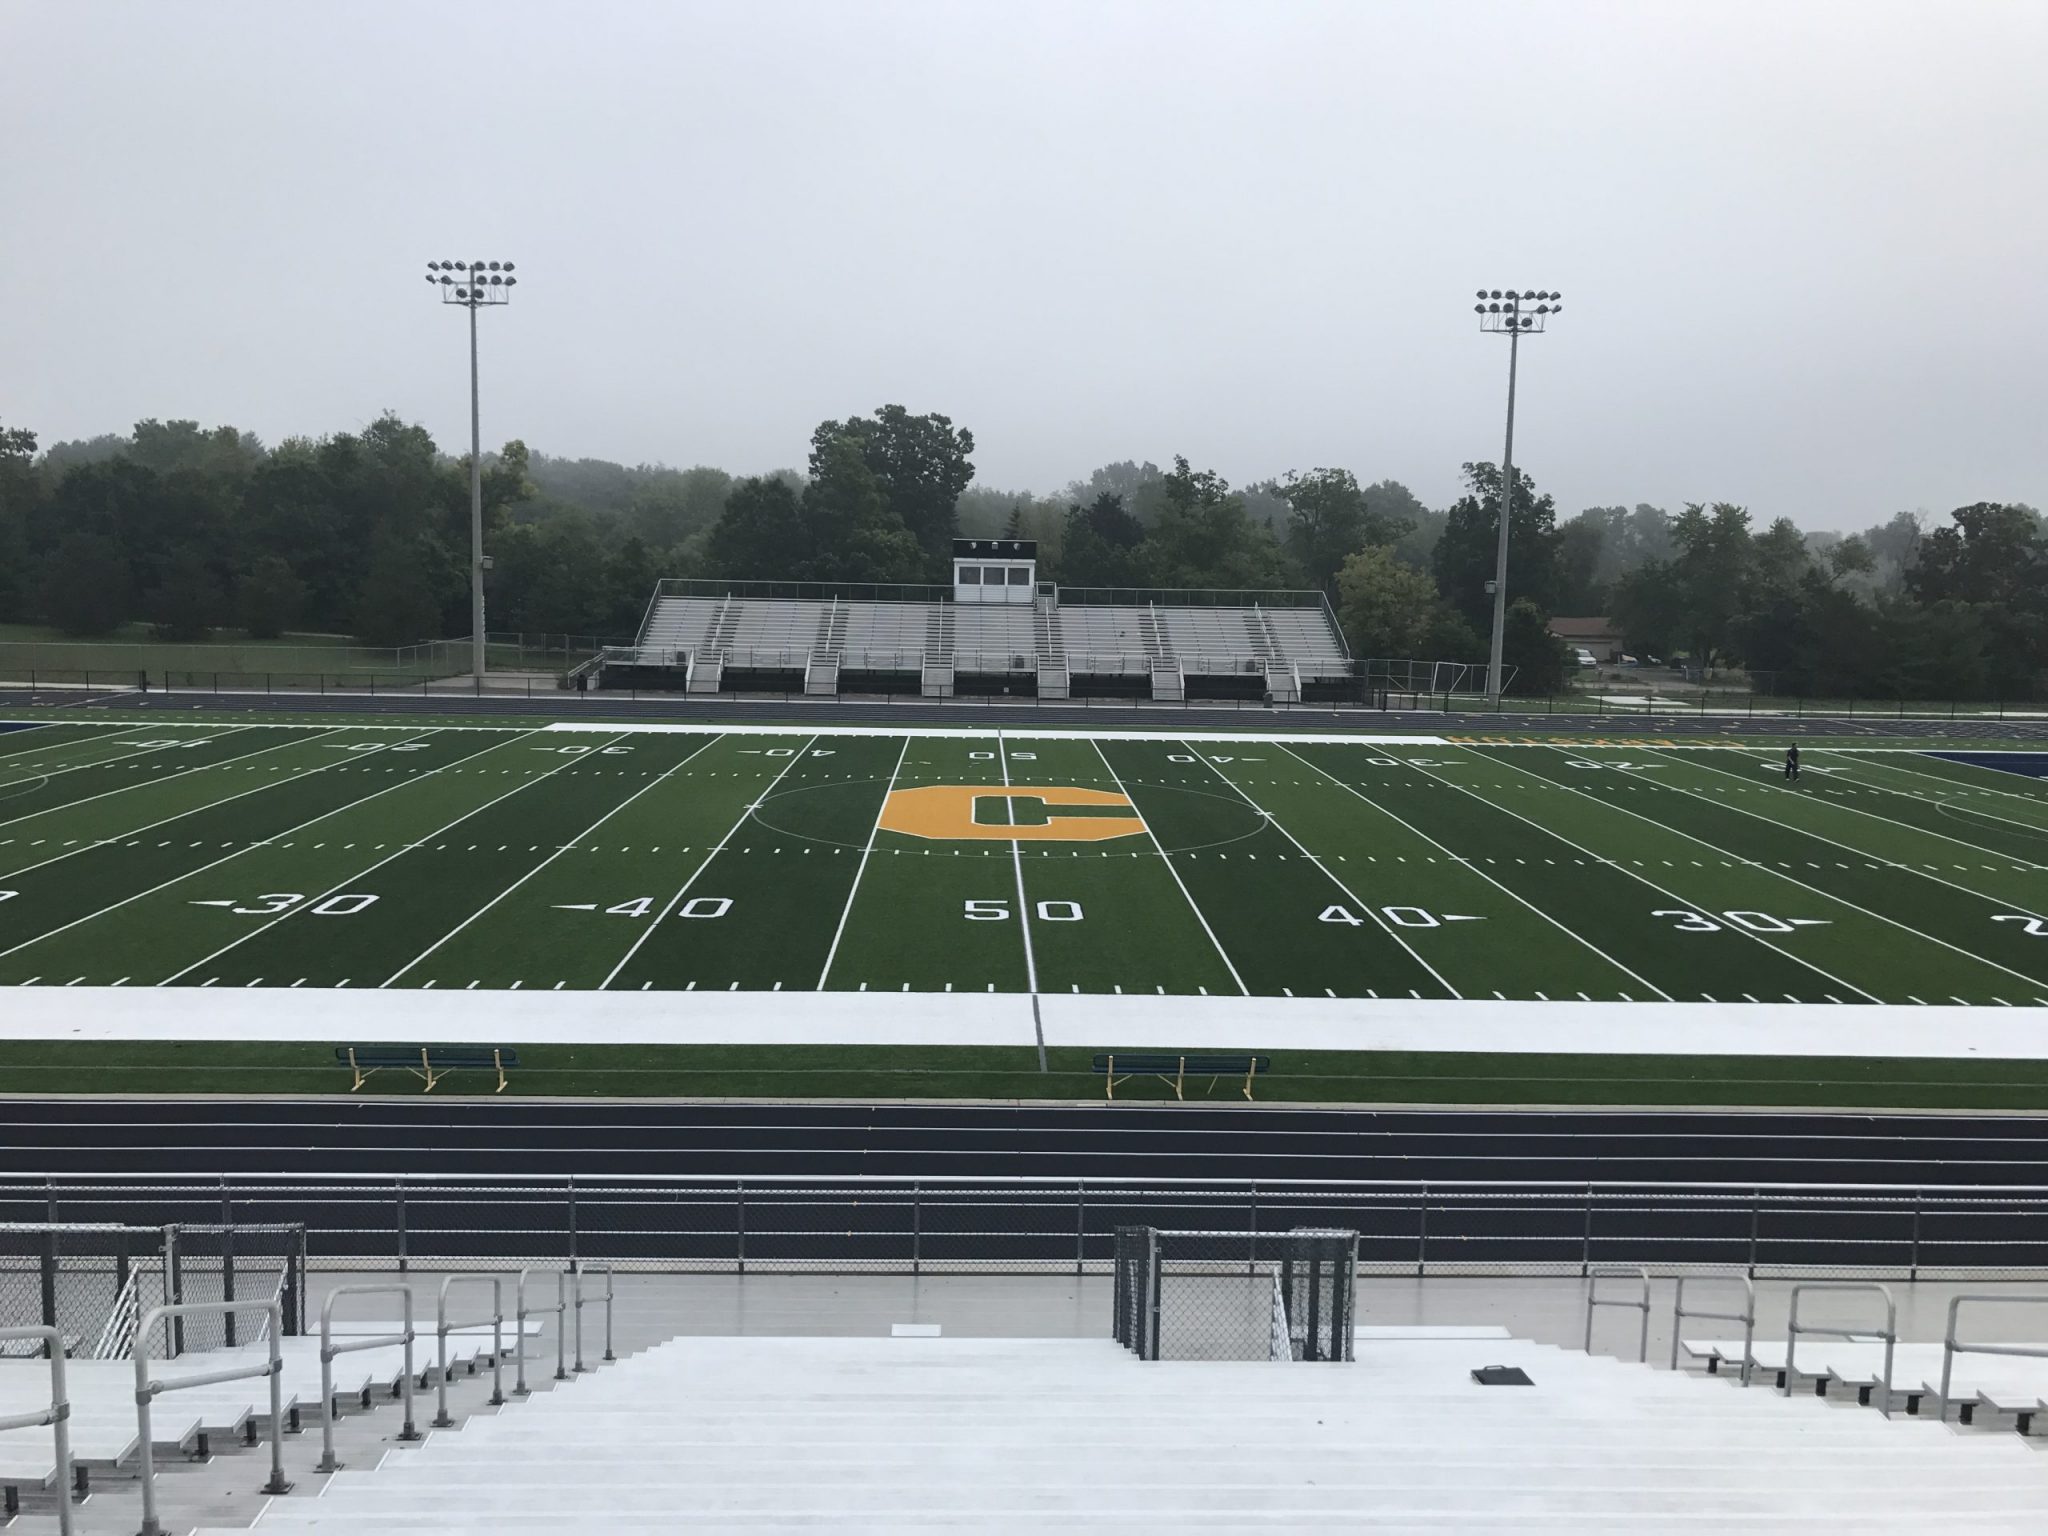 ClarkstonHighSchoolMichigan ATurf Synthetic Turf Systems